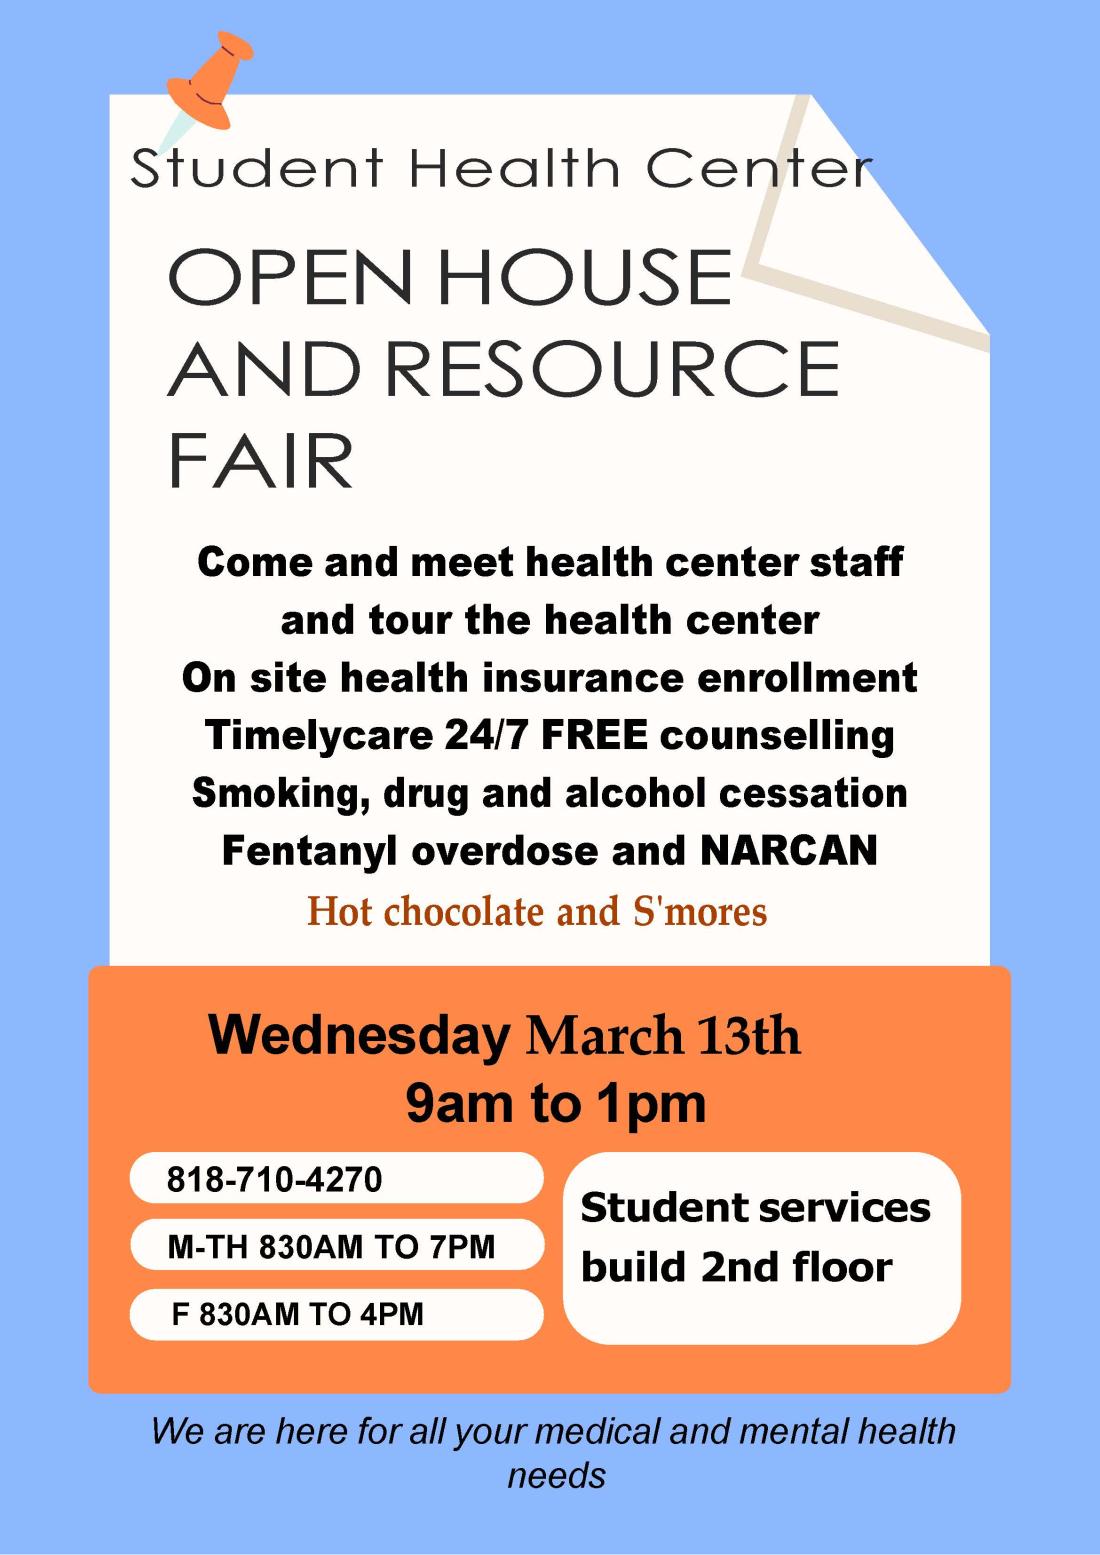 Join us for Student Health Center open house and recourse fair, meet the health center staff, ask questions and let us know your feedback, get some hot chocolate and S'mores, we will have onsite help with Timelycare registration, insurance help, smoking cessation, drug and alcohol recourses, and much more.